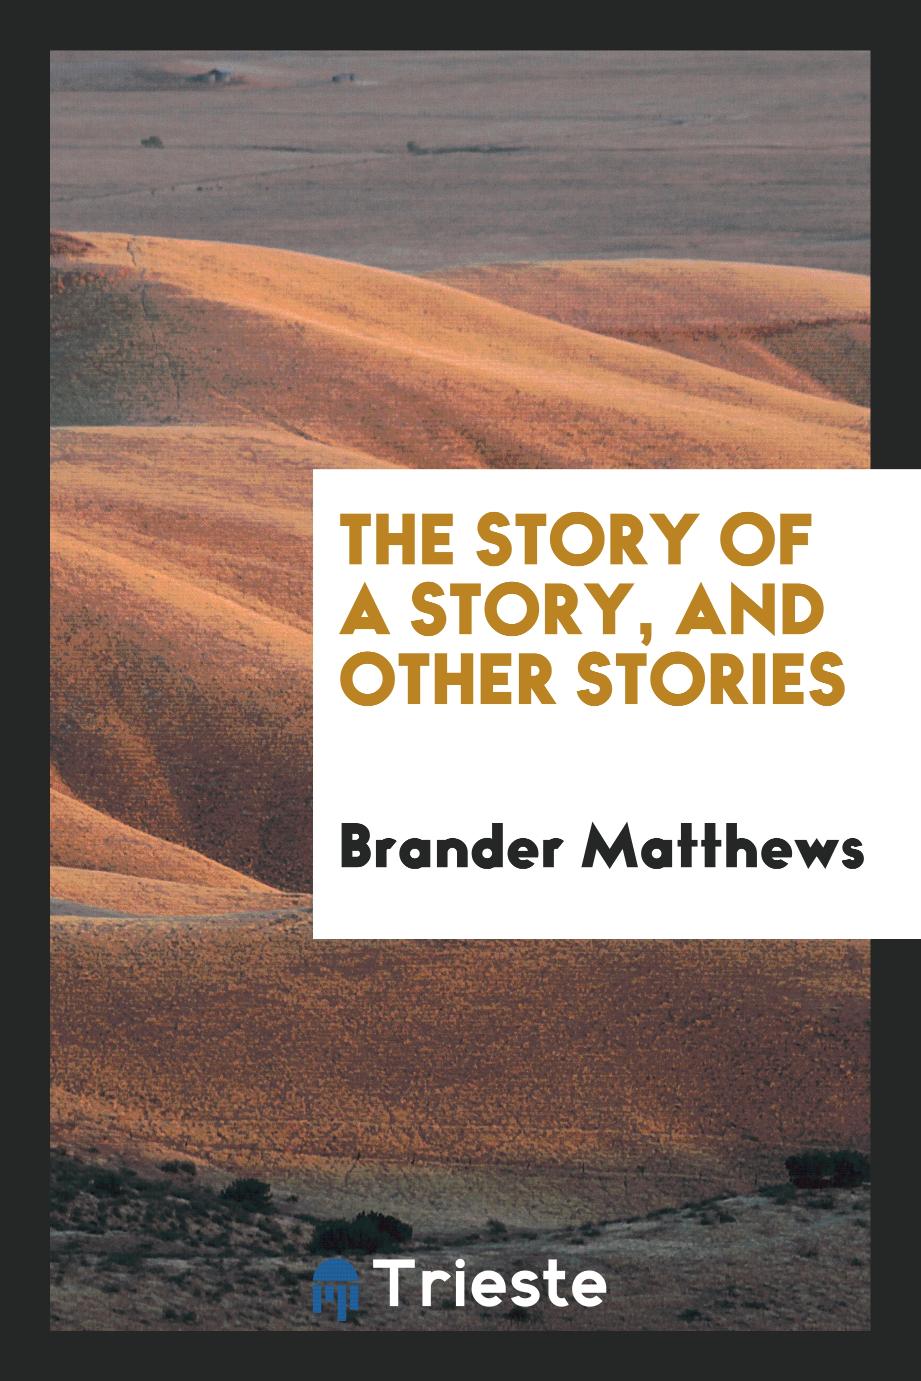 The story of a story, and other stories